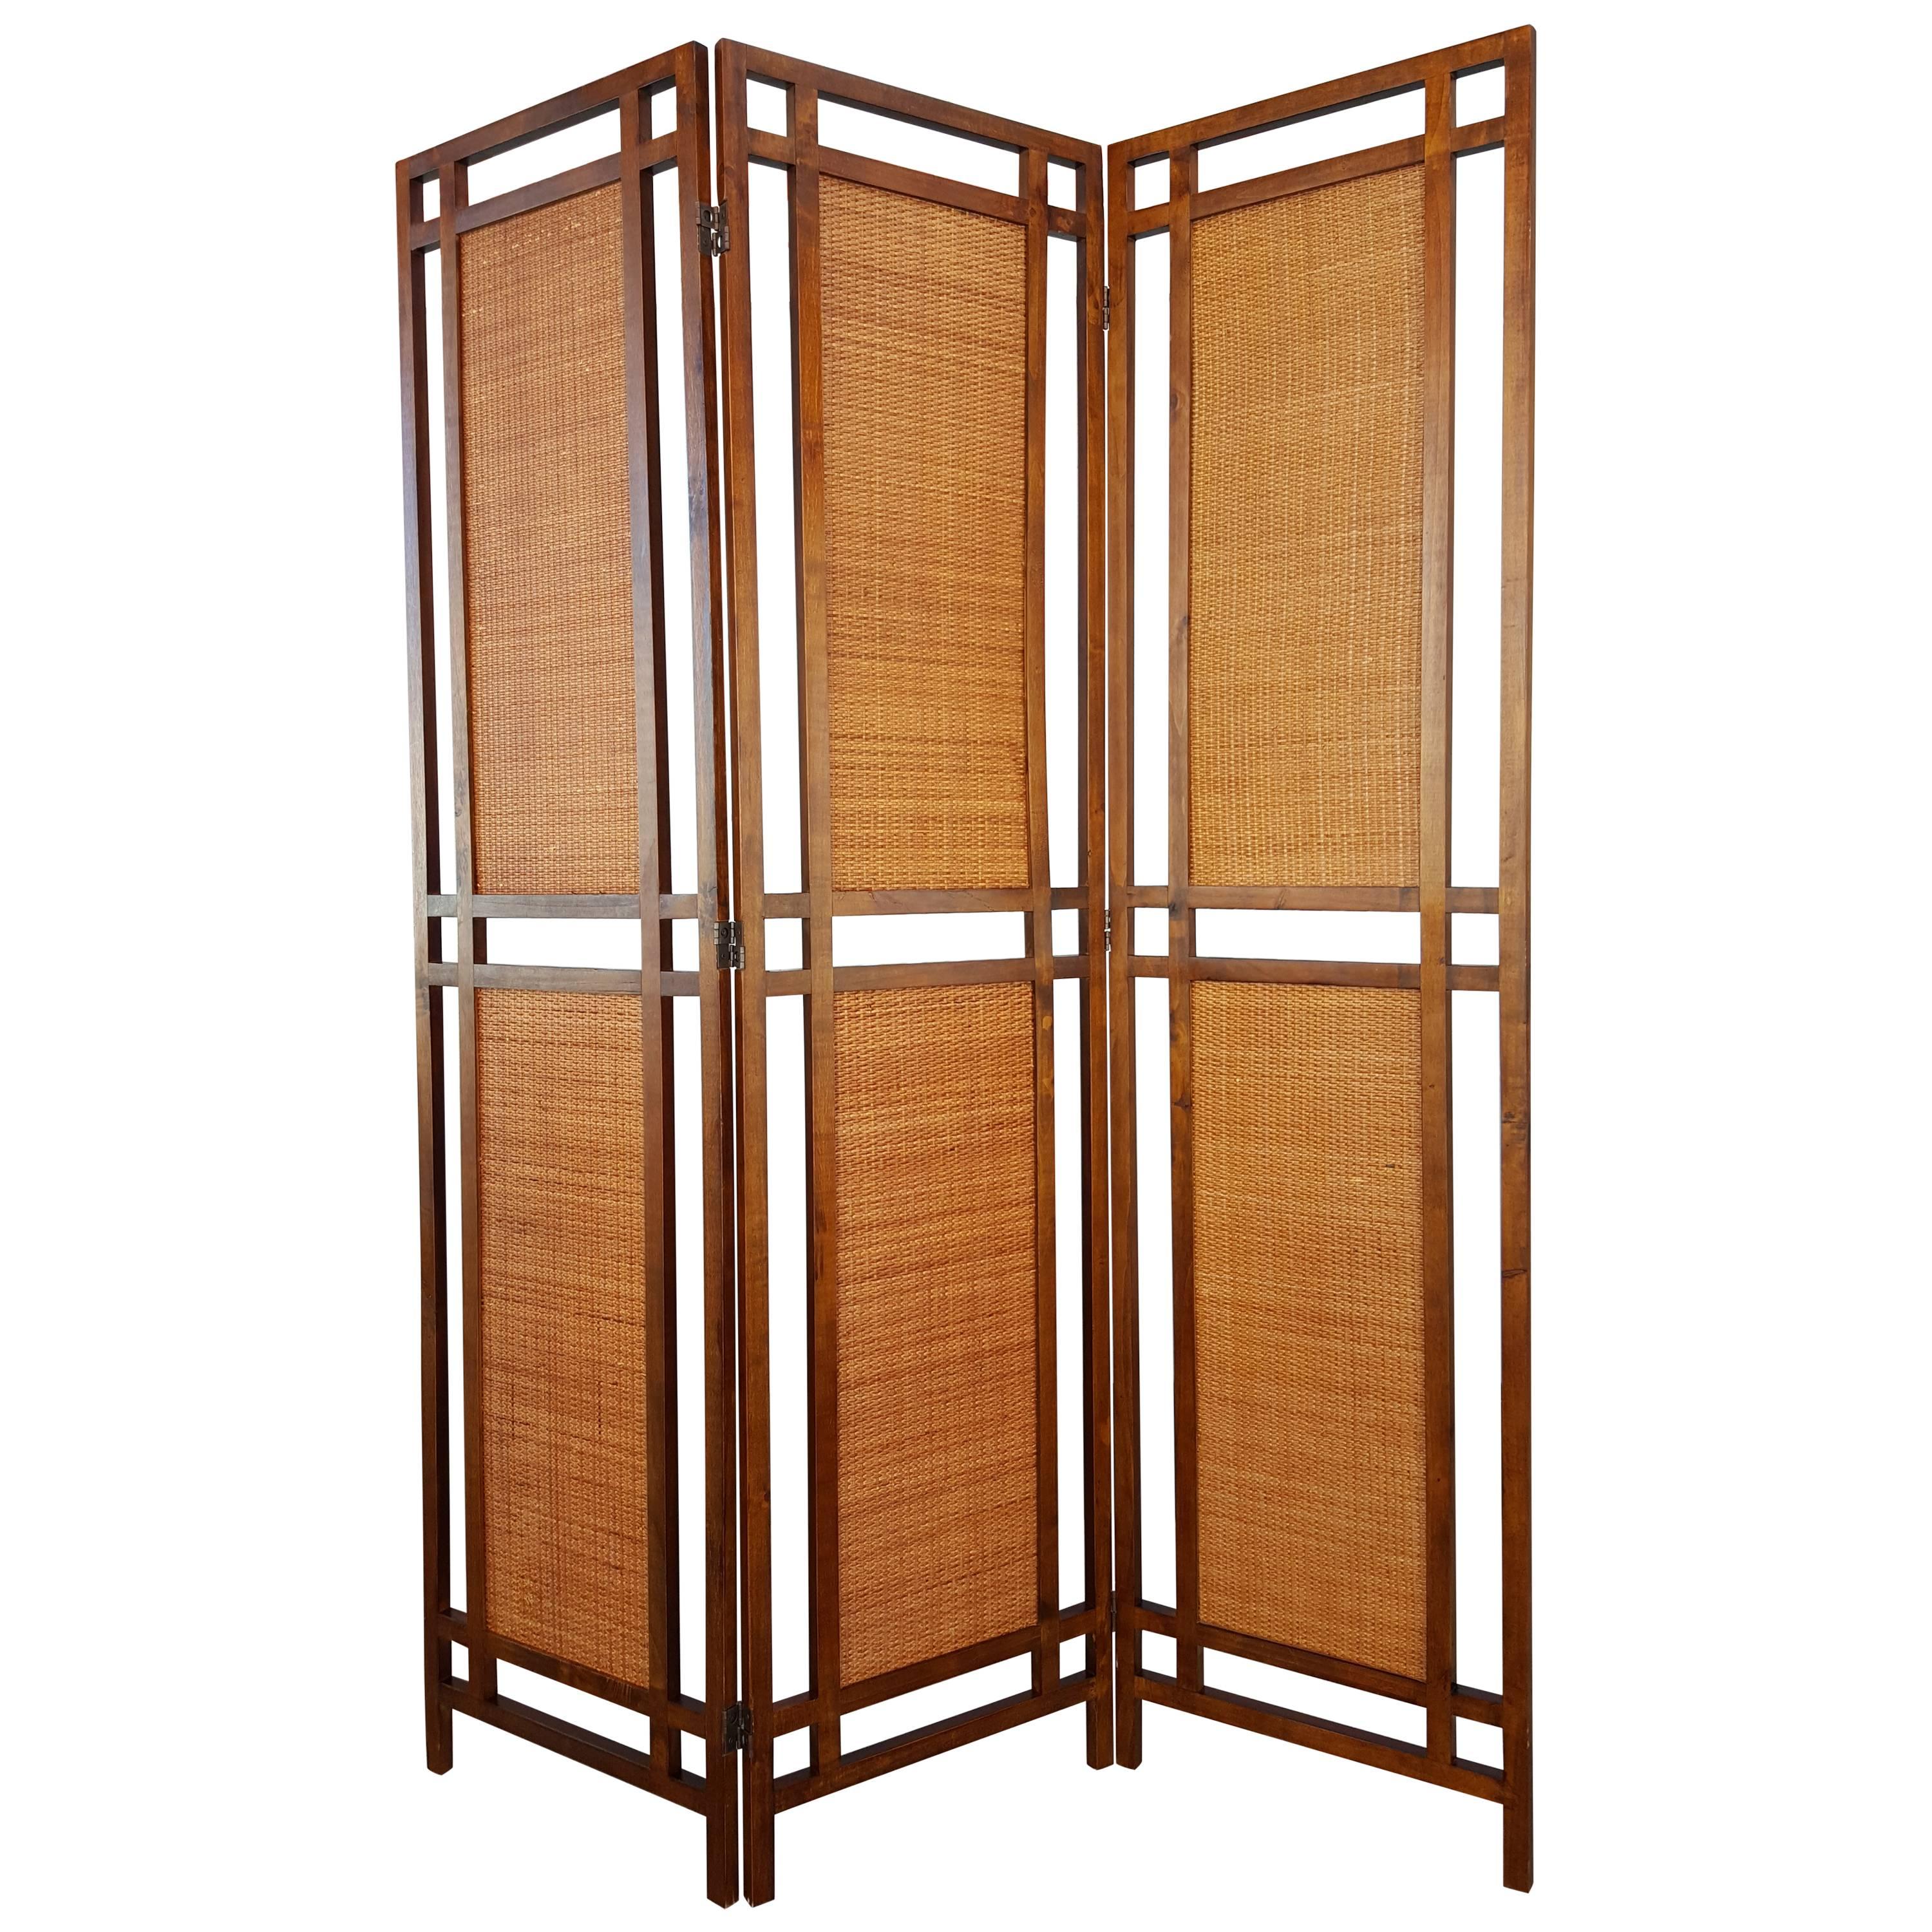 Rattan and Wood Room Divider / Screen